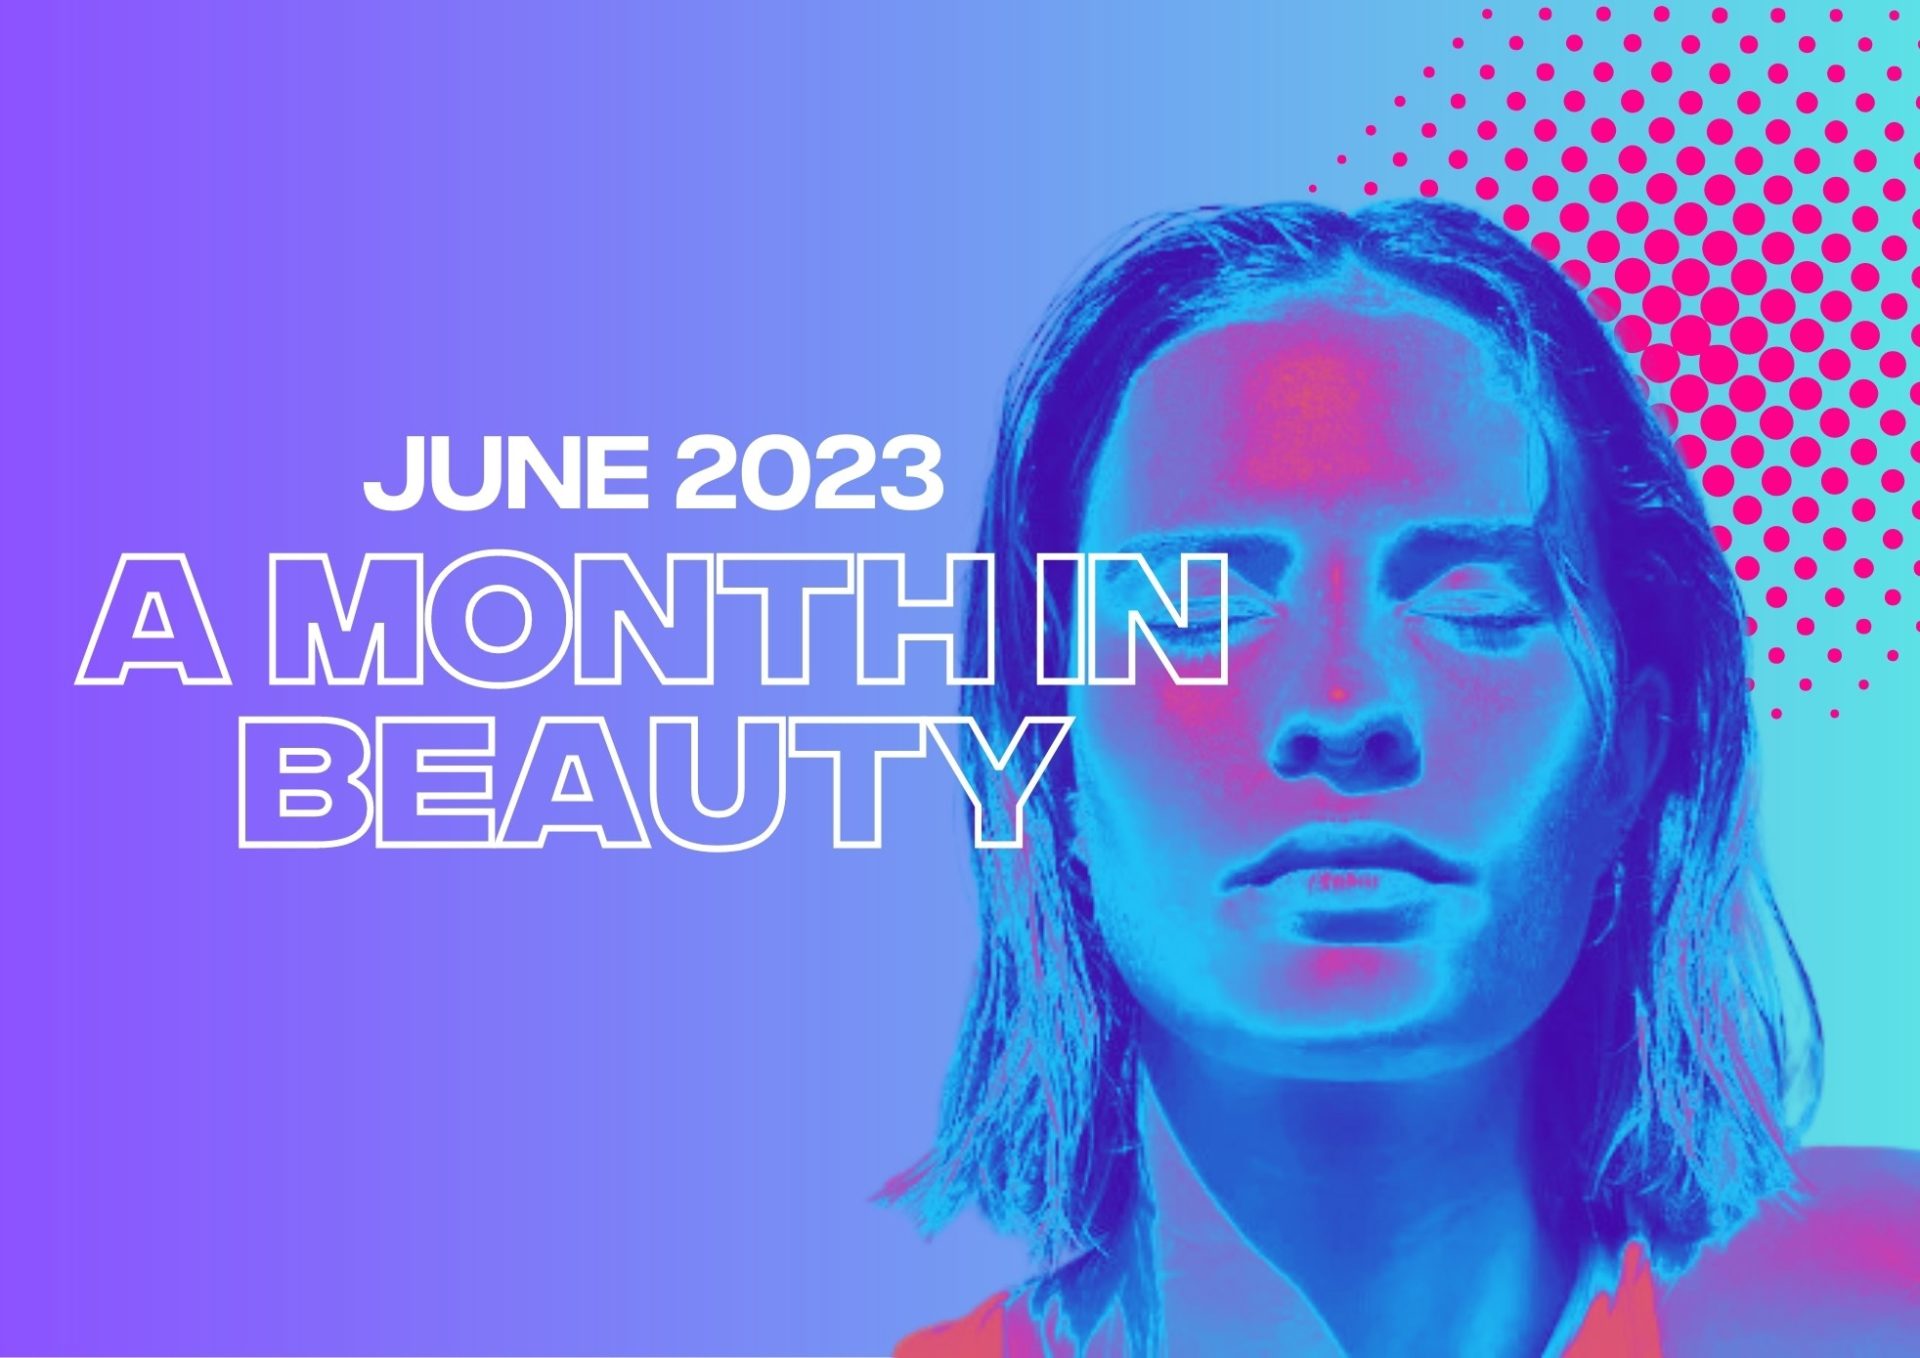 A Month in Beauty: June 2023